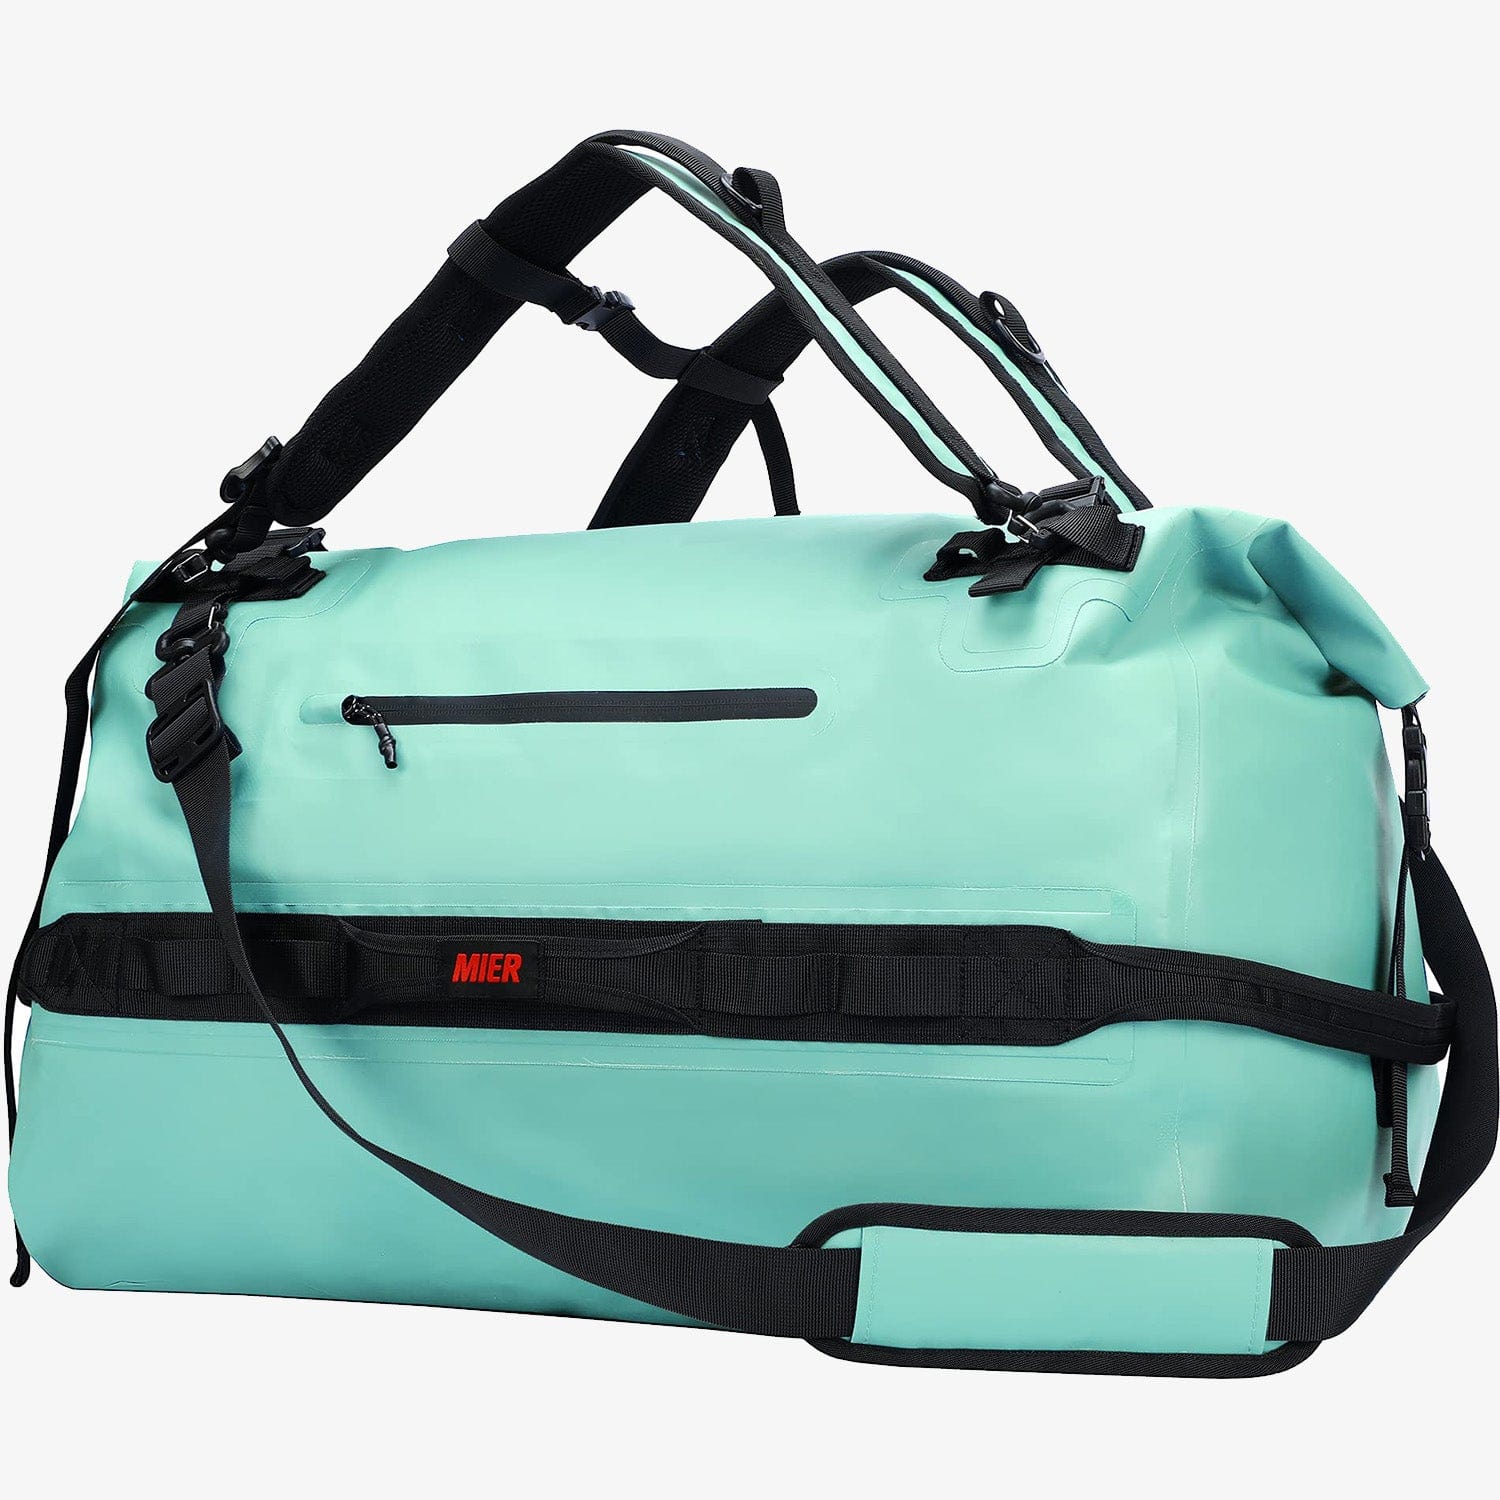 Buy MIER Portable Thermal Insulated Cooler Bag Mini Lunch Bag for Kids,  Ocean Depths Online at Low Prices in India - Amazon.in